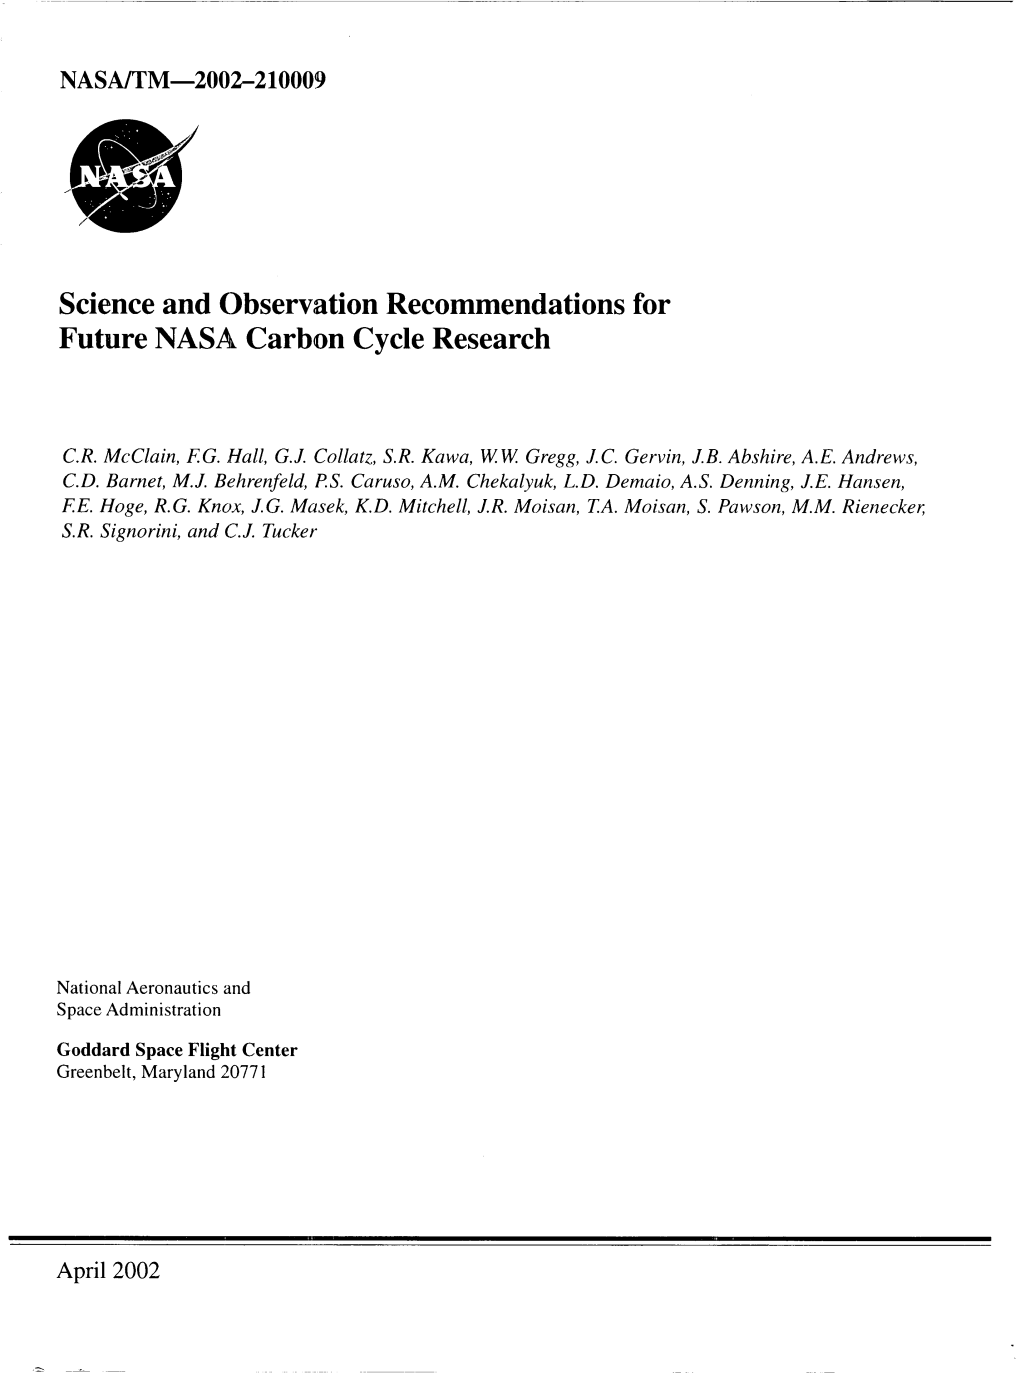 Science and Observation Recommendations for Future NASA Carbon Cycle Research